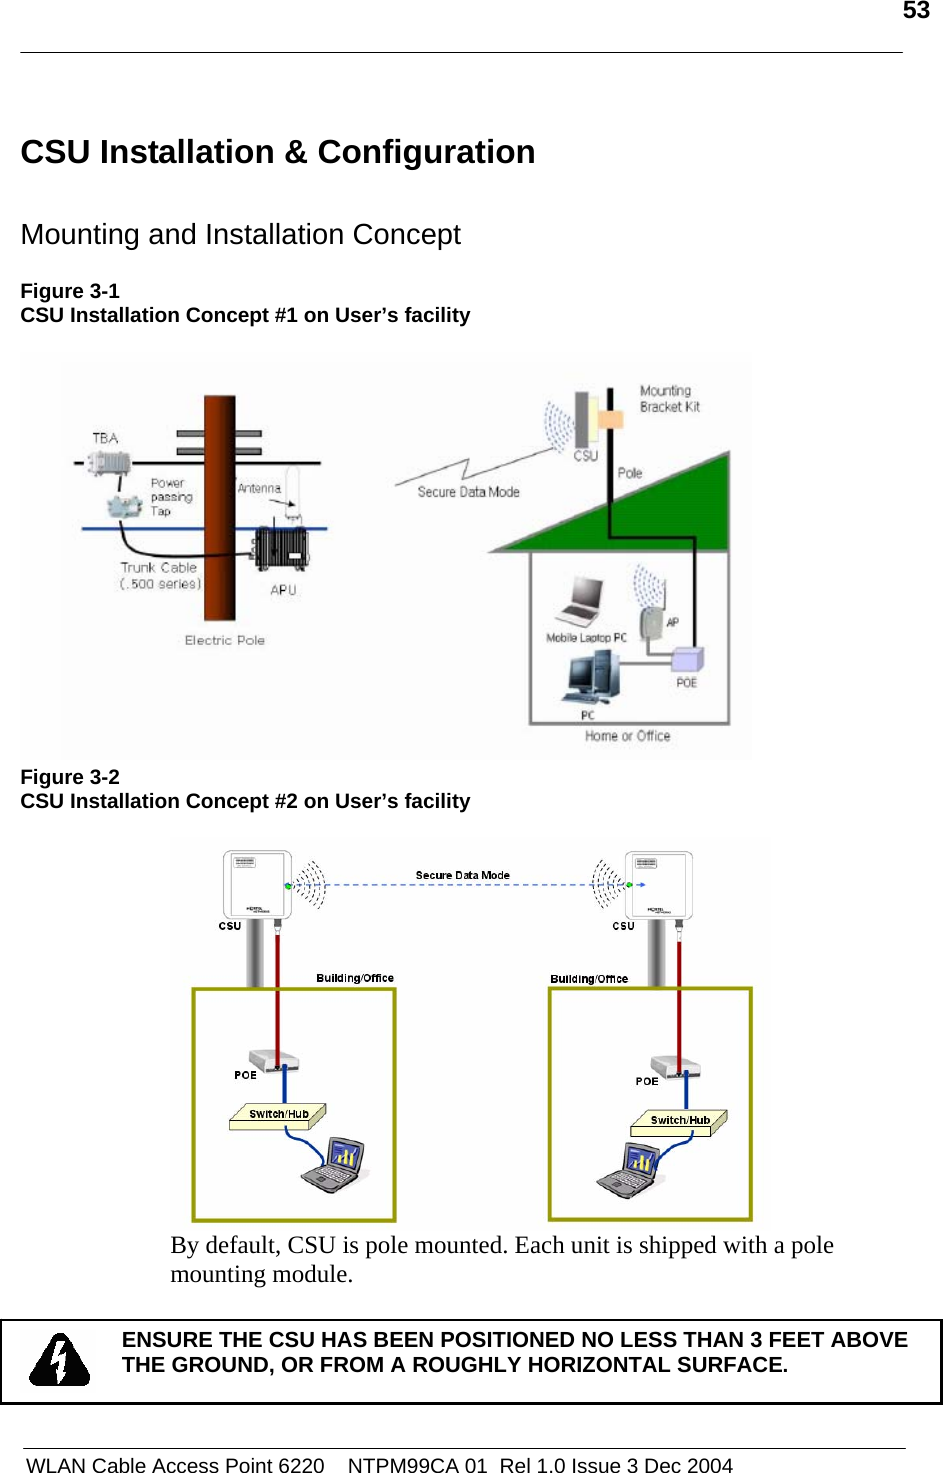   53   WLAN Cable Access Point 6220    NTPM99CA 01  Rel 1.0 Issue 3 Dec 2004 CSU Installation &amp; Configuration  Mounting and Installation Concept   Figure 3-1 CSU Installation Concept #1 on User’s facility   Figure 3-2 CSU Installation Concept #2 on User’s facility   By default, CSU is pole mounted. Each unit is shipped with a pole mounting module.     ENSURE THE CSU HAS BEEN POSITIONED NO LESS THAN 3 FEET ABOVE THE GROUND, OR FROM A ROUGHLY HORIZONTAL SURFACE. 